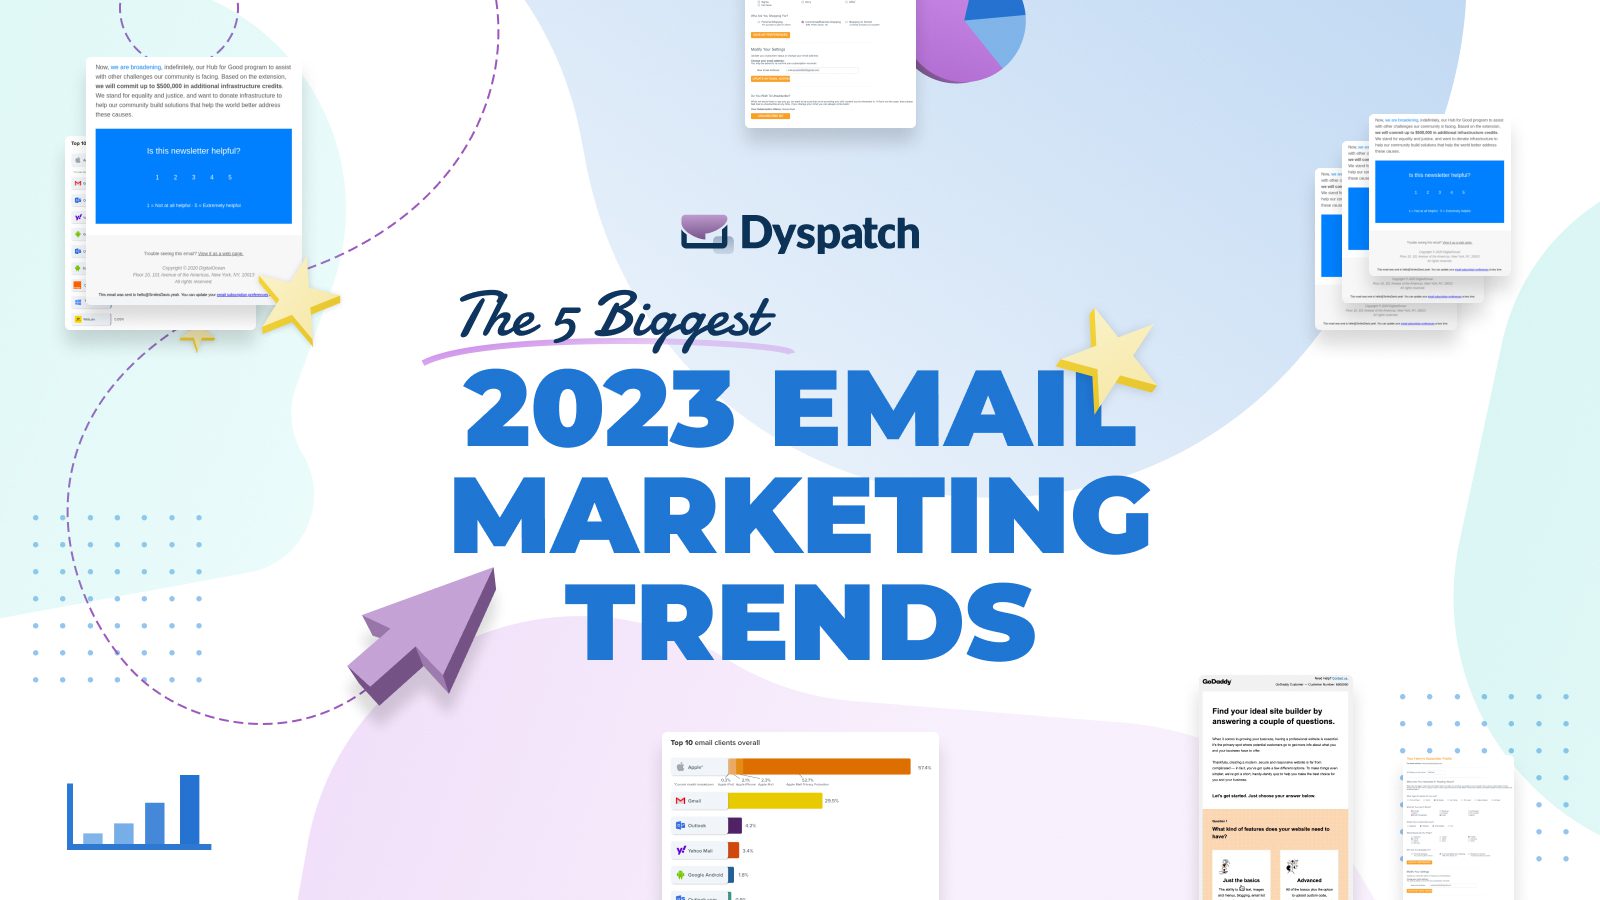 Dyspatch blog - the biggest 2023 email marketing trends